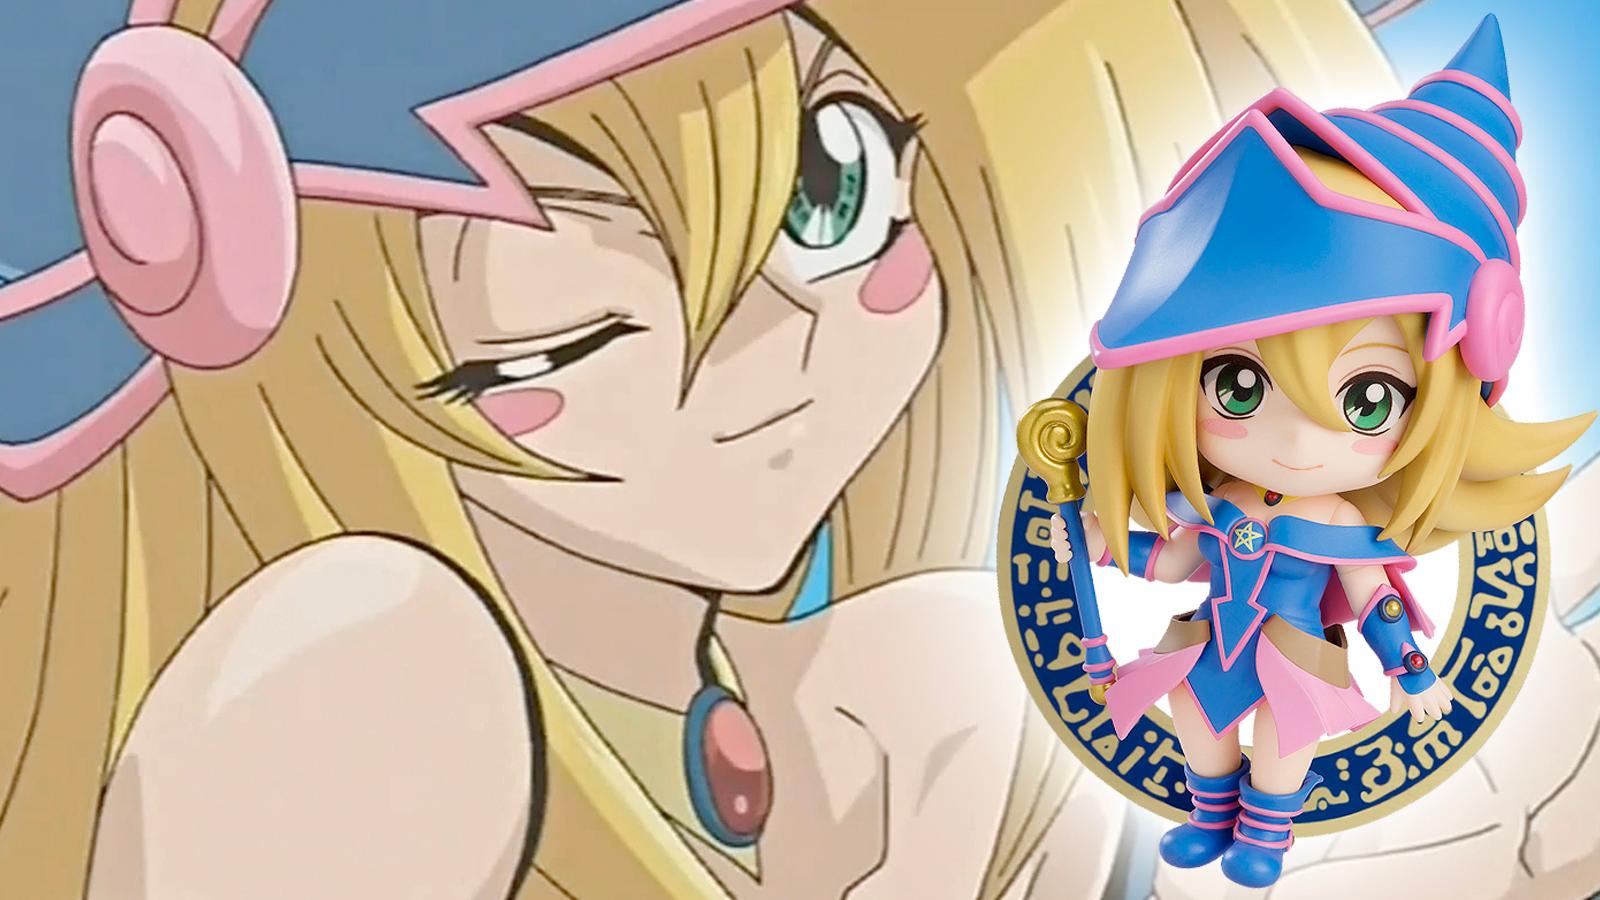 dark magician girl from the yugioh anime with the nendoroid version in front of her